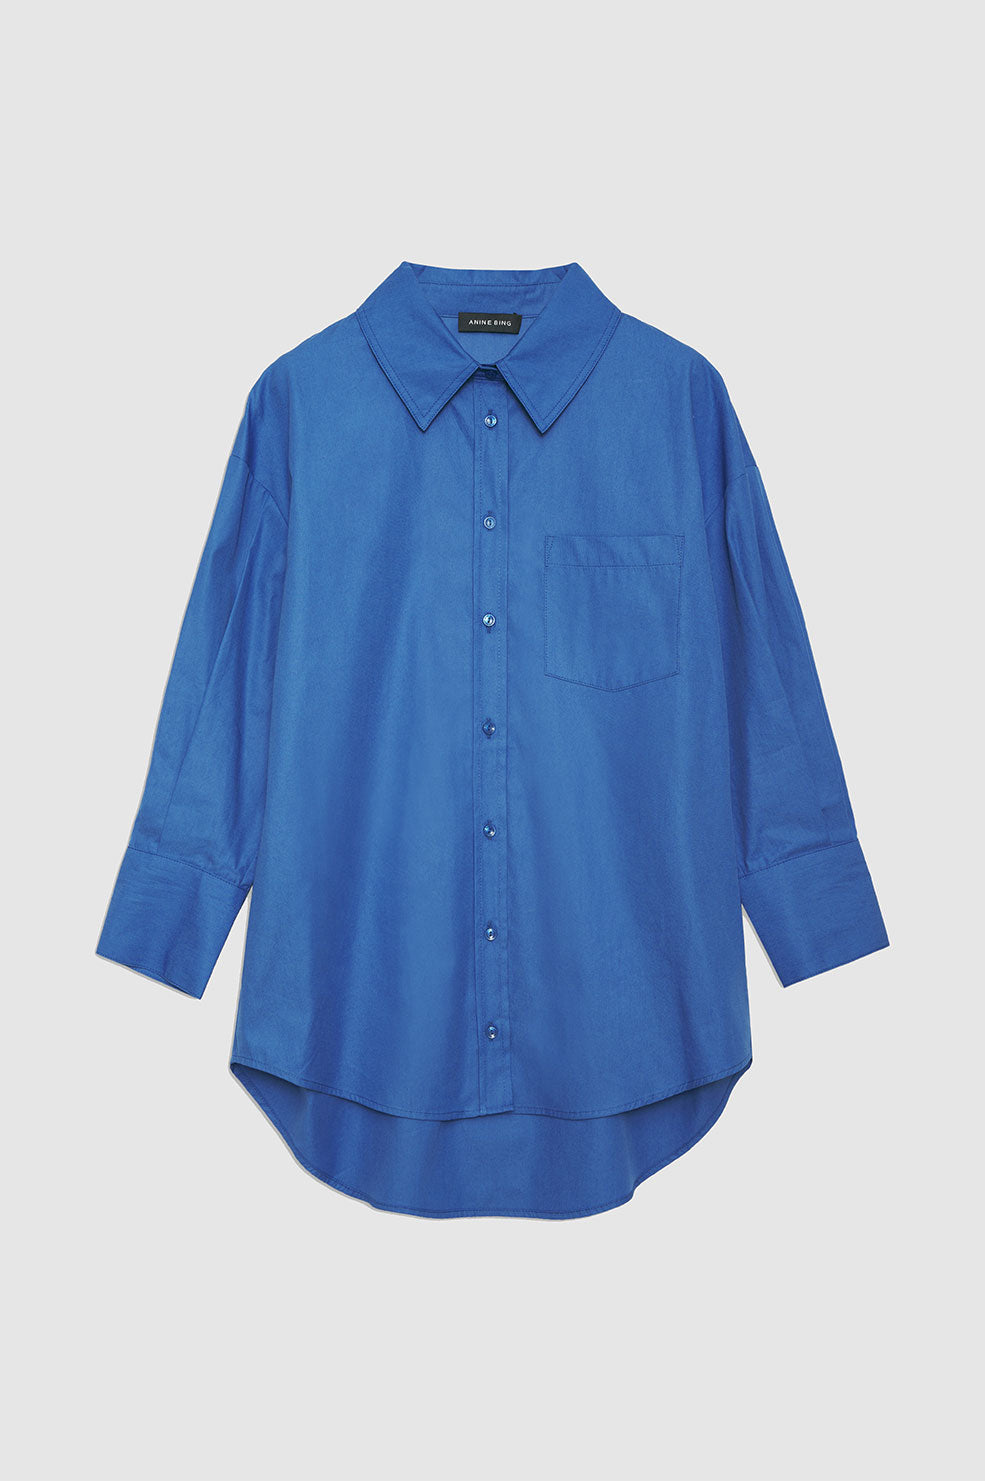 ANINE BING Mika Shirt - Electric Blue - Front View